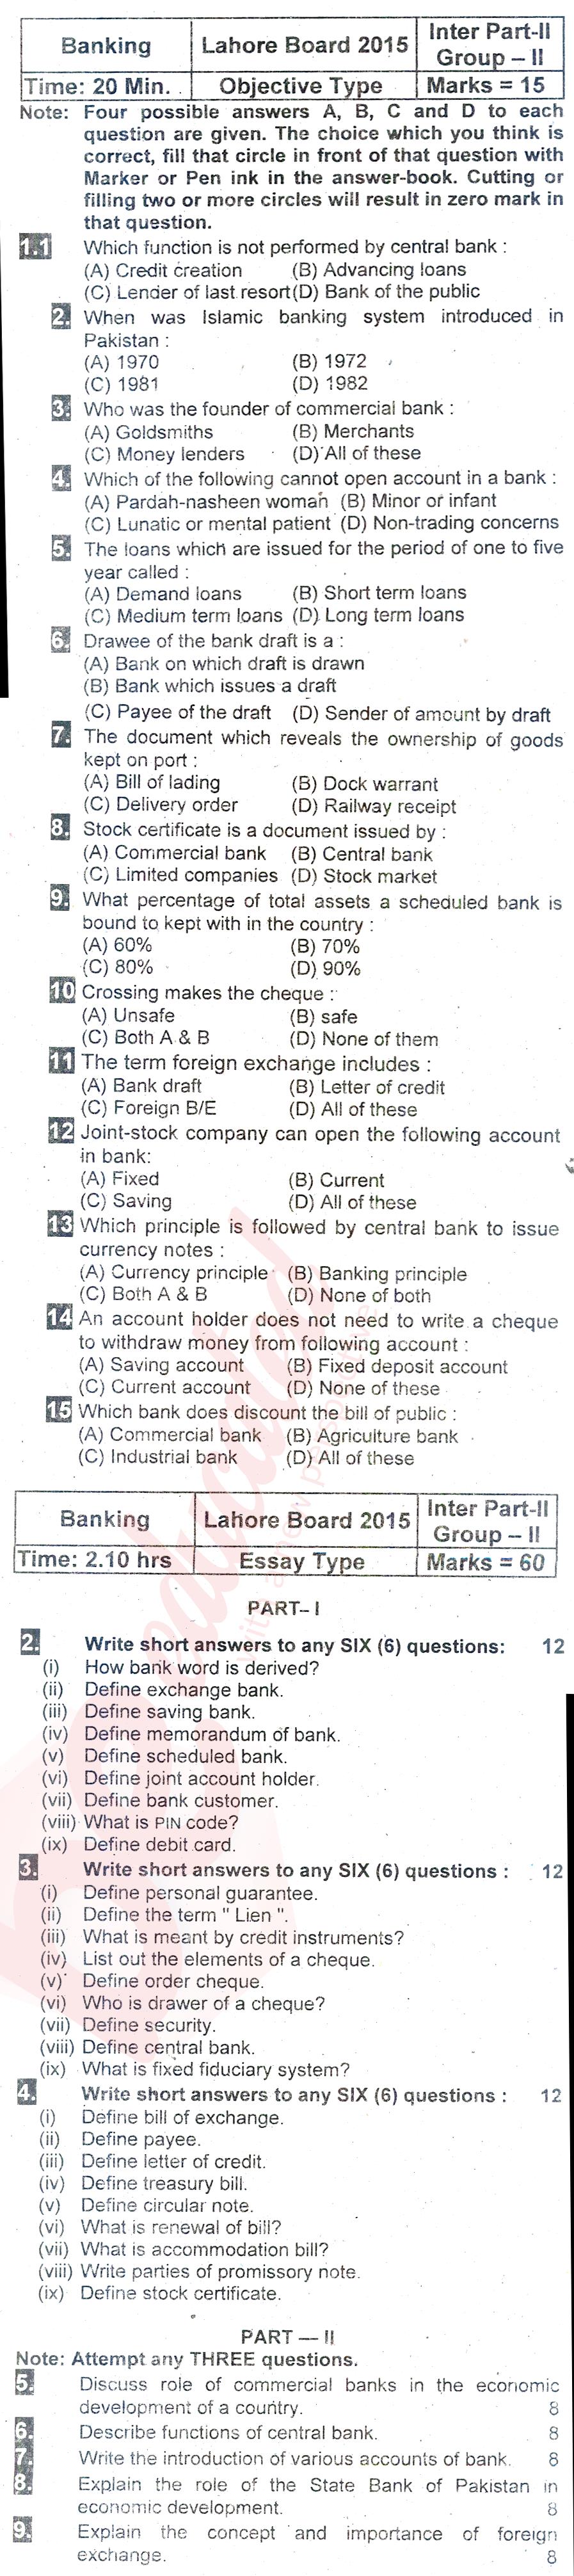 Principles of Banking ICOM Part 2 Past Paper Group 2 BISE Lahore 2015